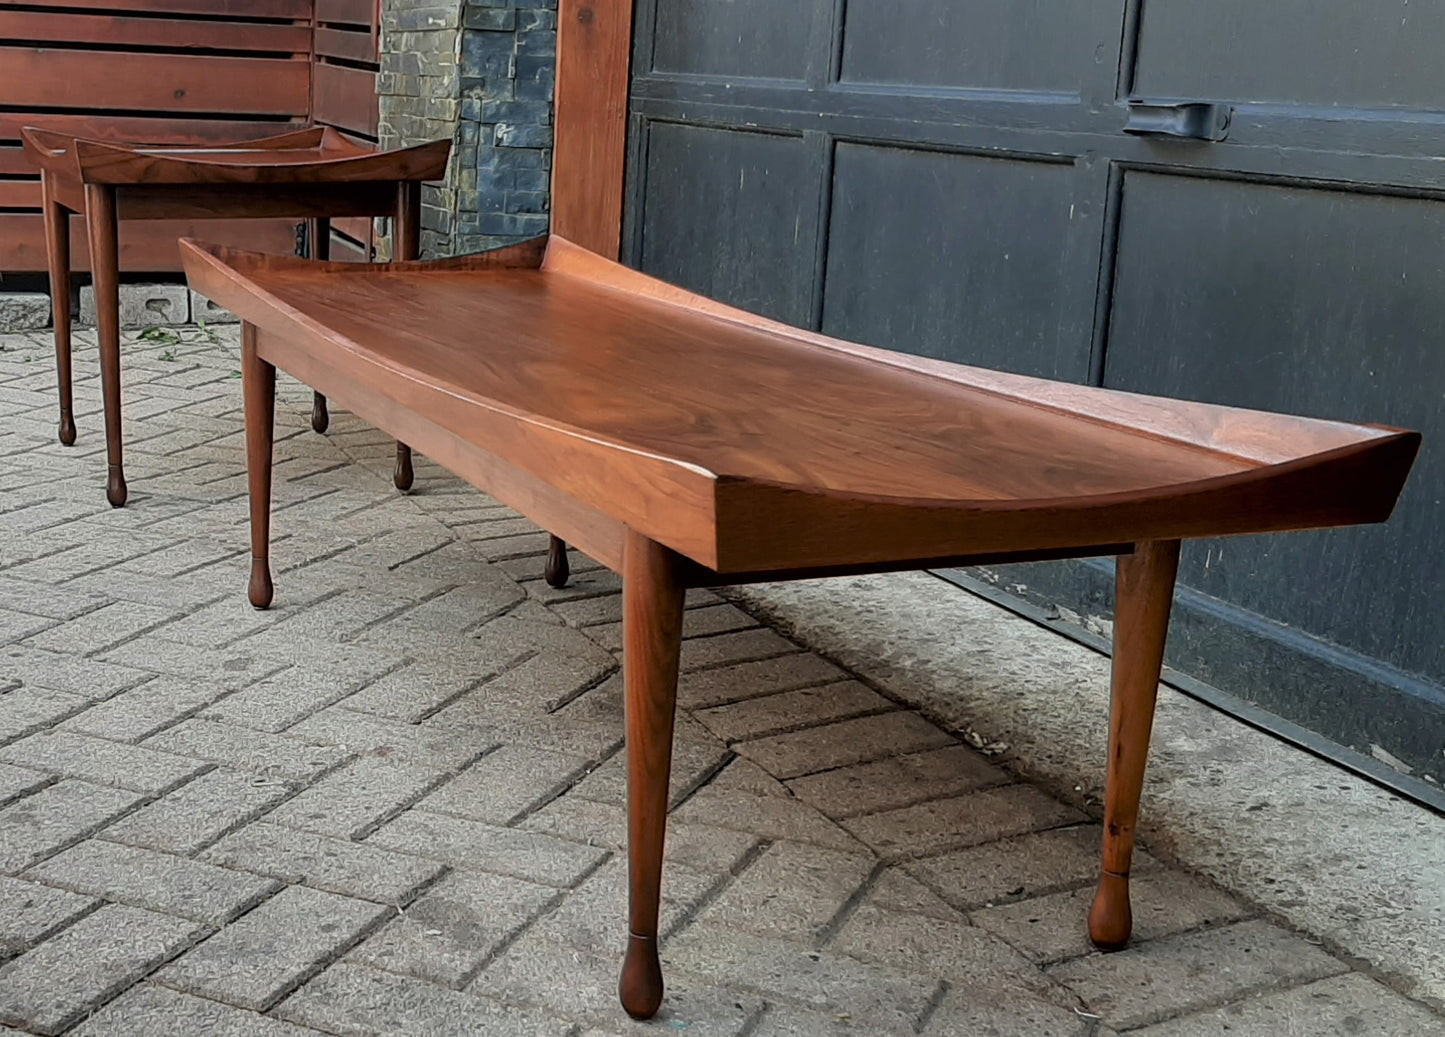 REFINISHED MCM Walnut Coffee Table by Deilcraft 5ft, PERFECT